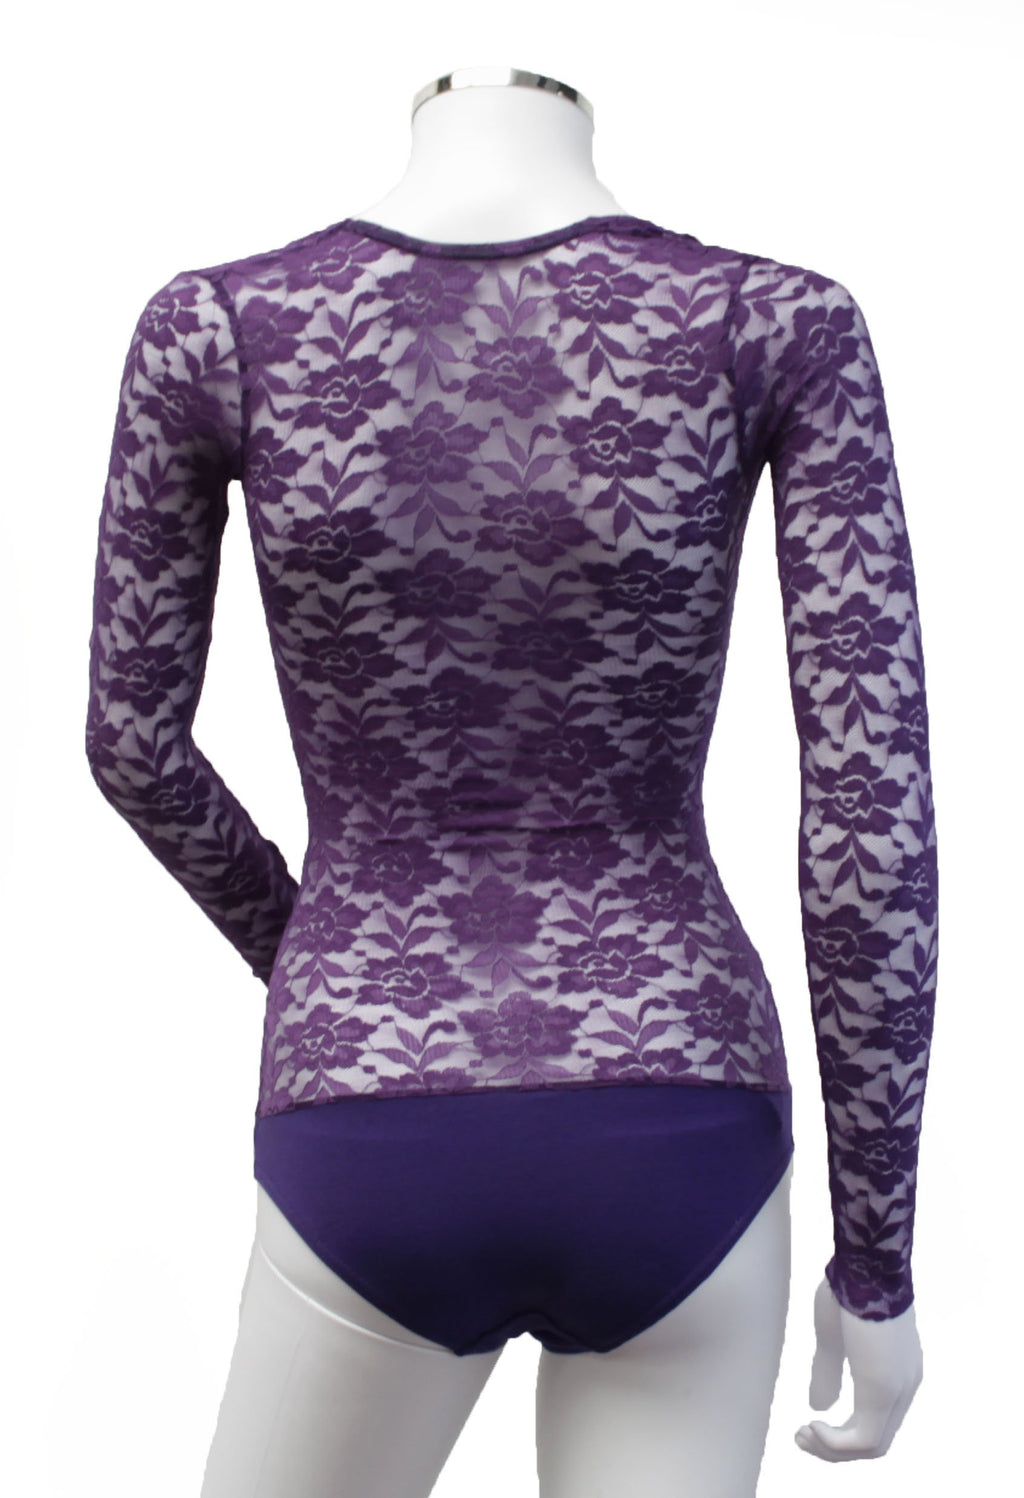 Underbust with Sleeves - Purple Lace